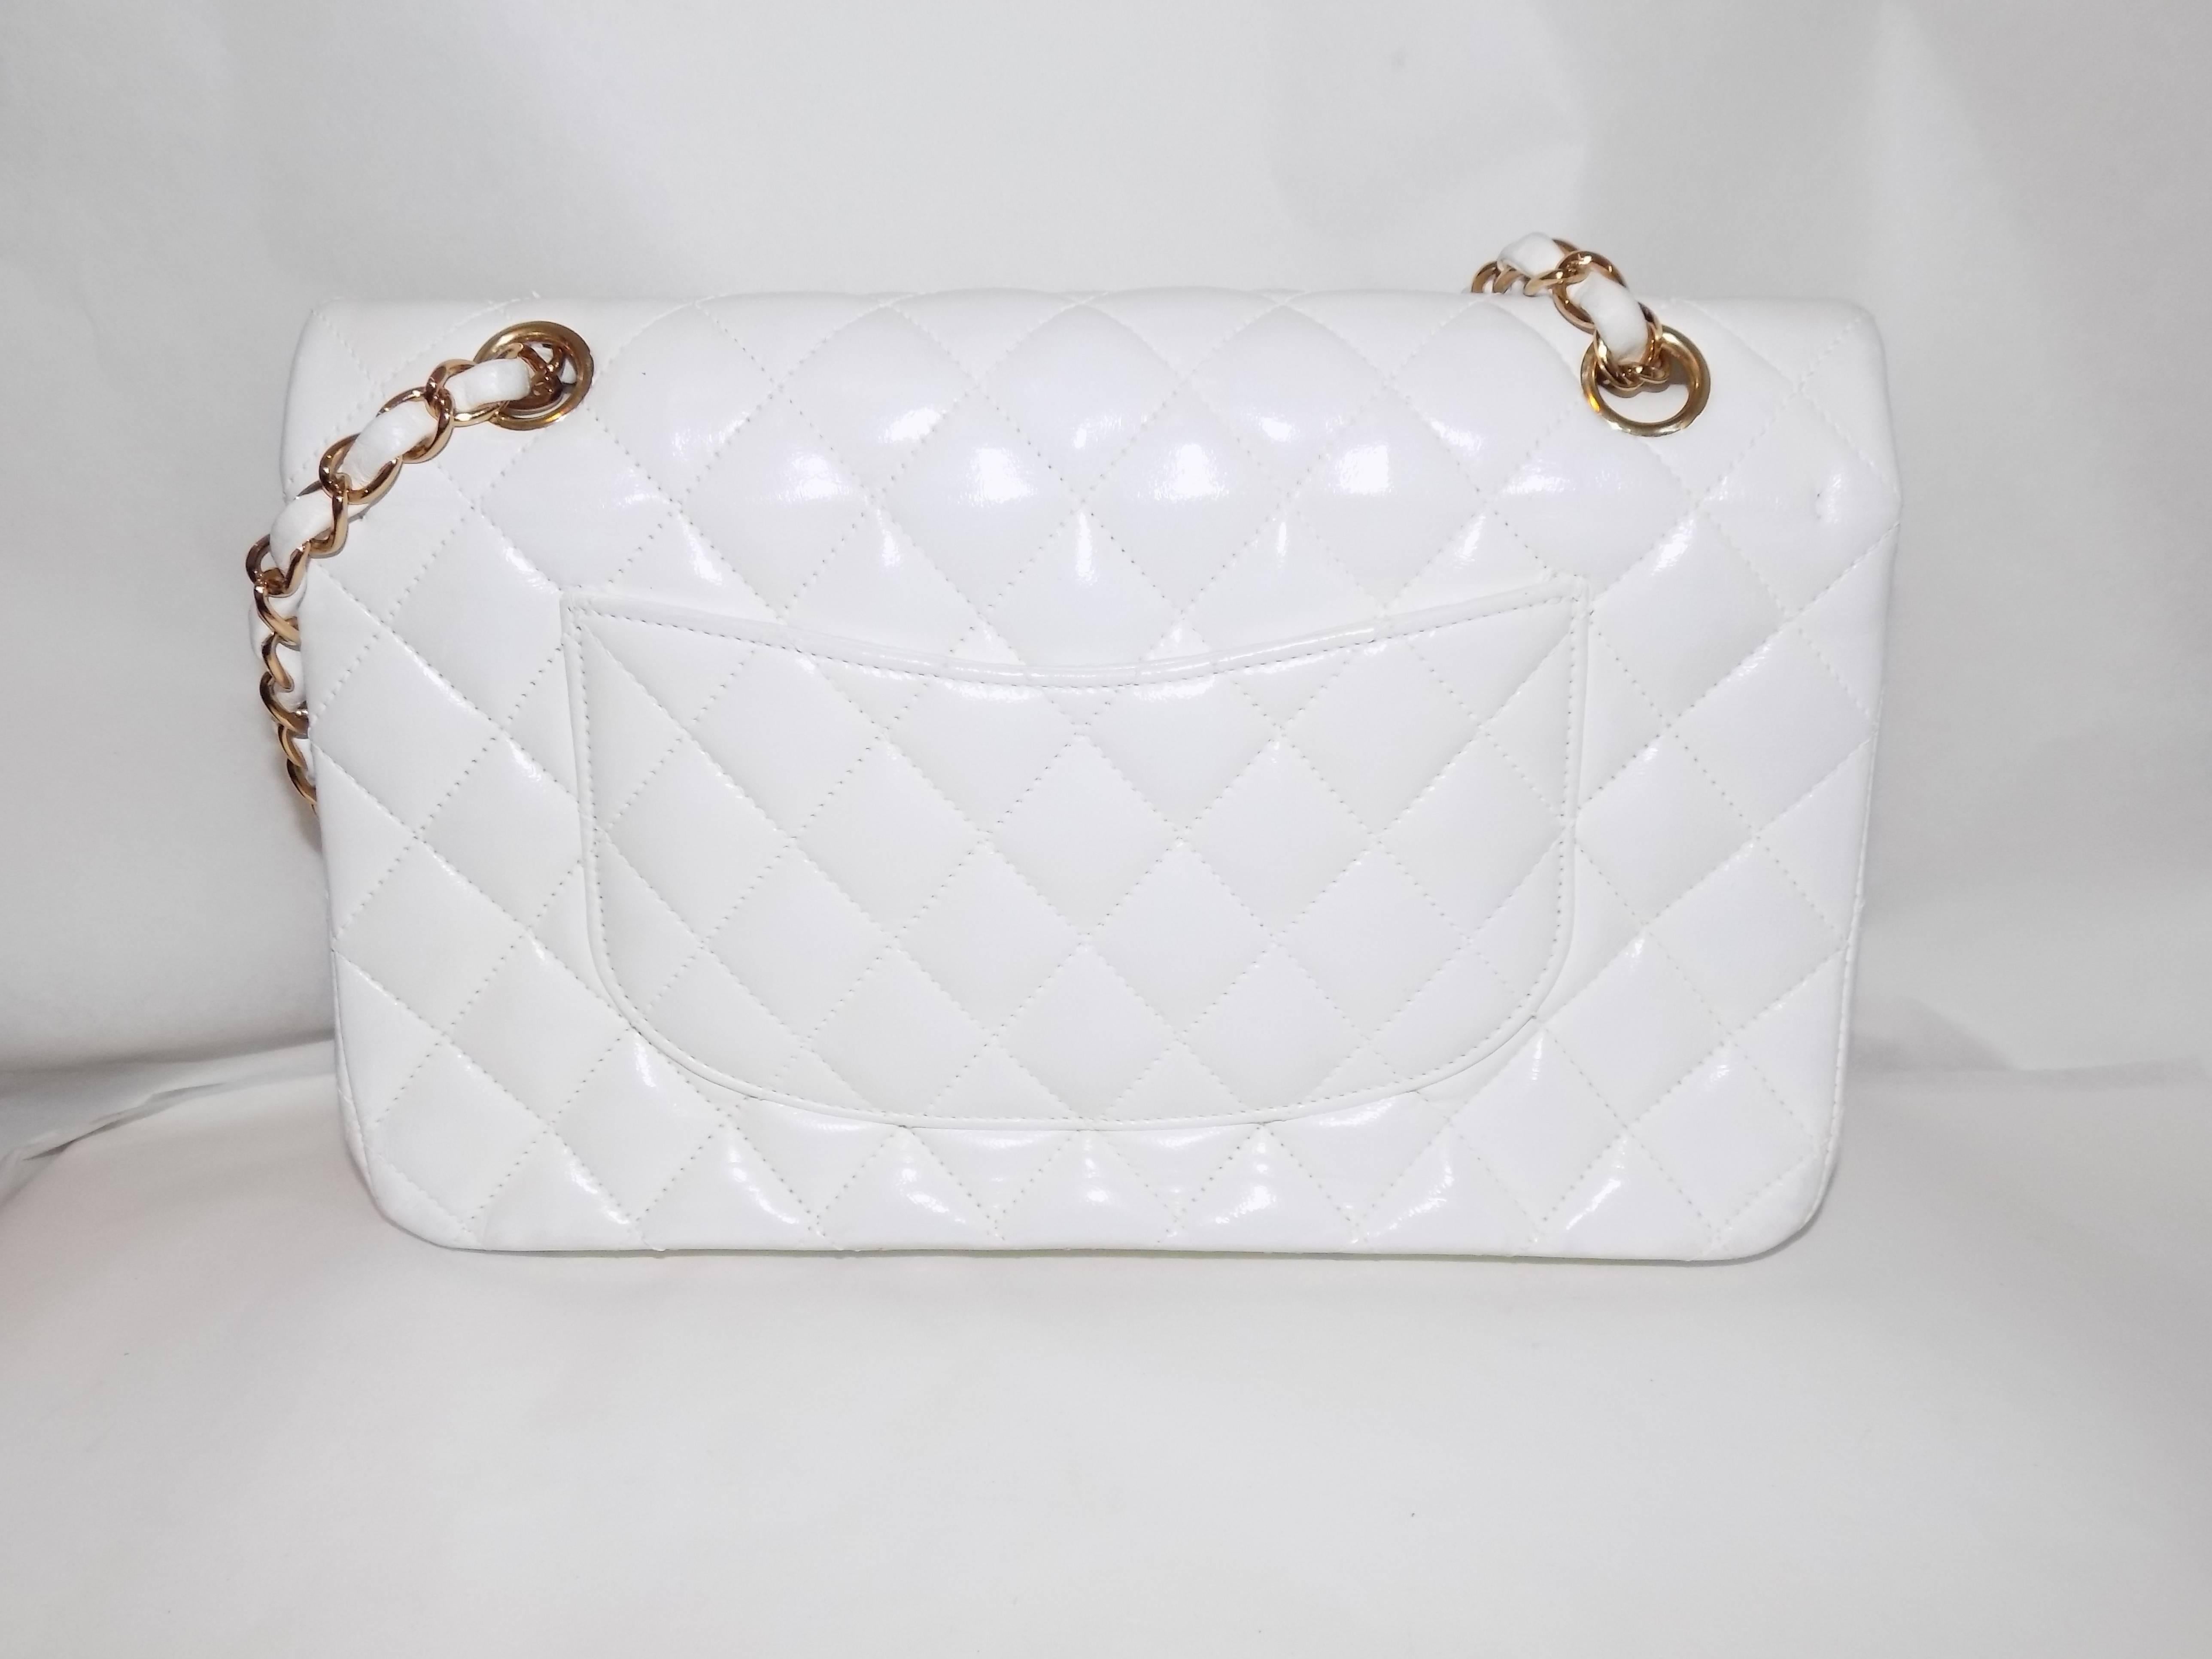 White Lamb Skin Quilted Medium Classic Double Flap Shoulder Bag  In Excellent Condition For Sale In New York, NY